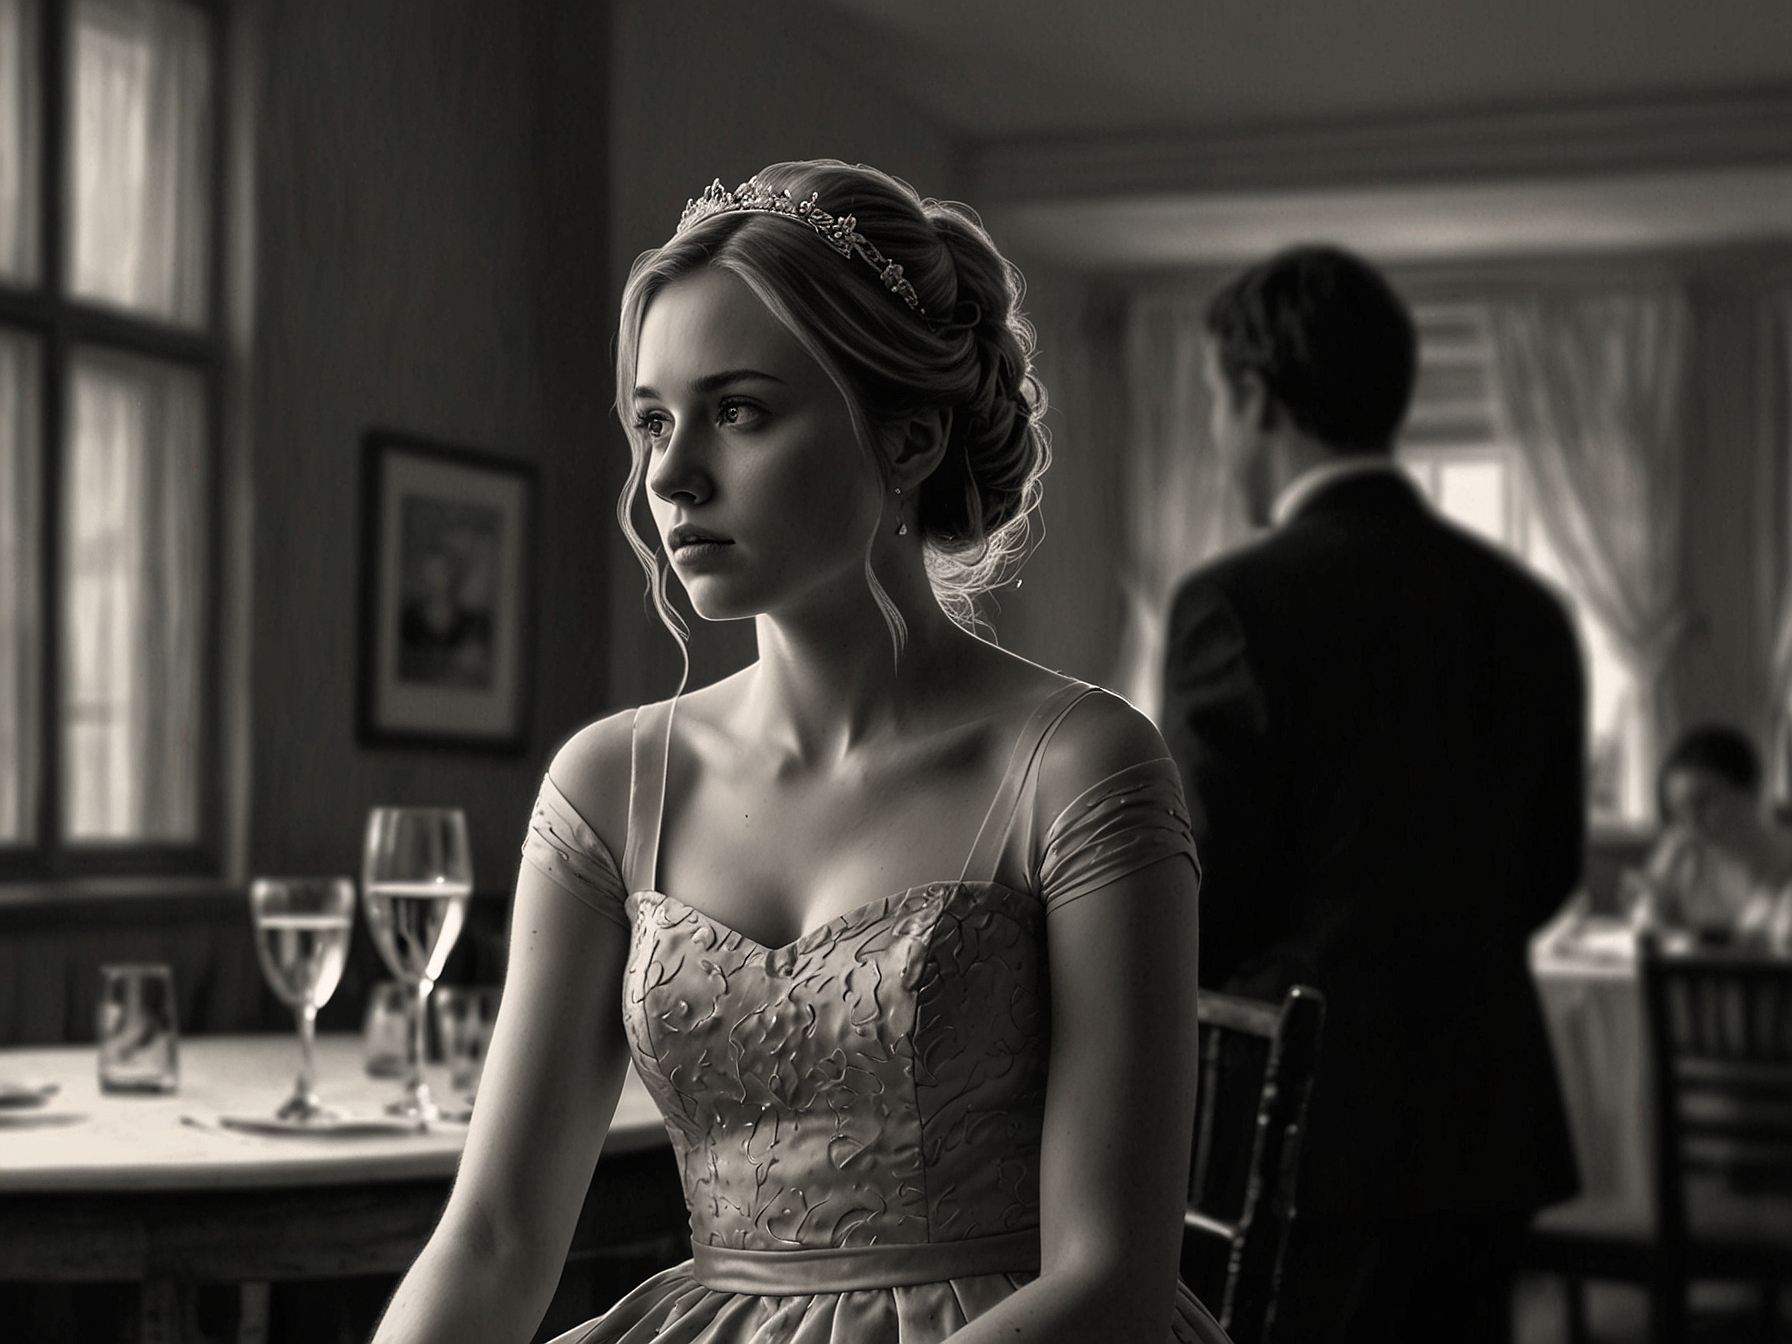 Later at the wedding reception, the maid of honor looks thoughtful and conflicted, reflecting the internal storm upon learning about her ex’s feelings for the bride.